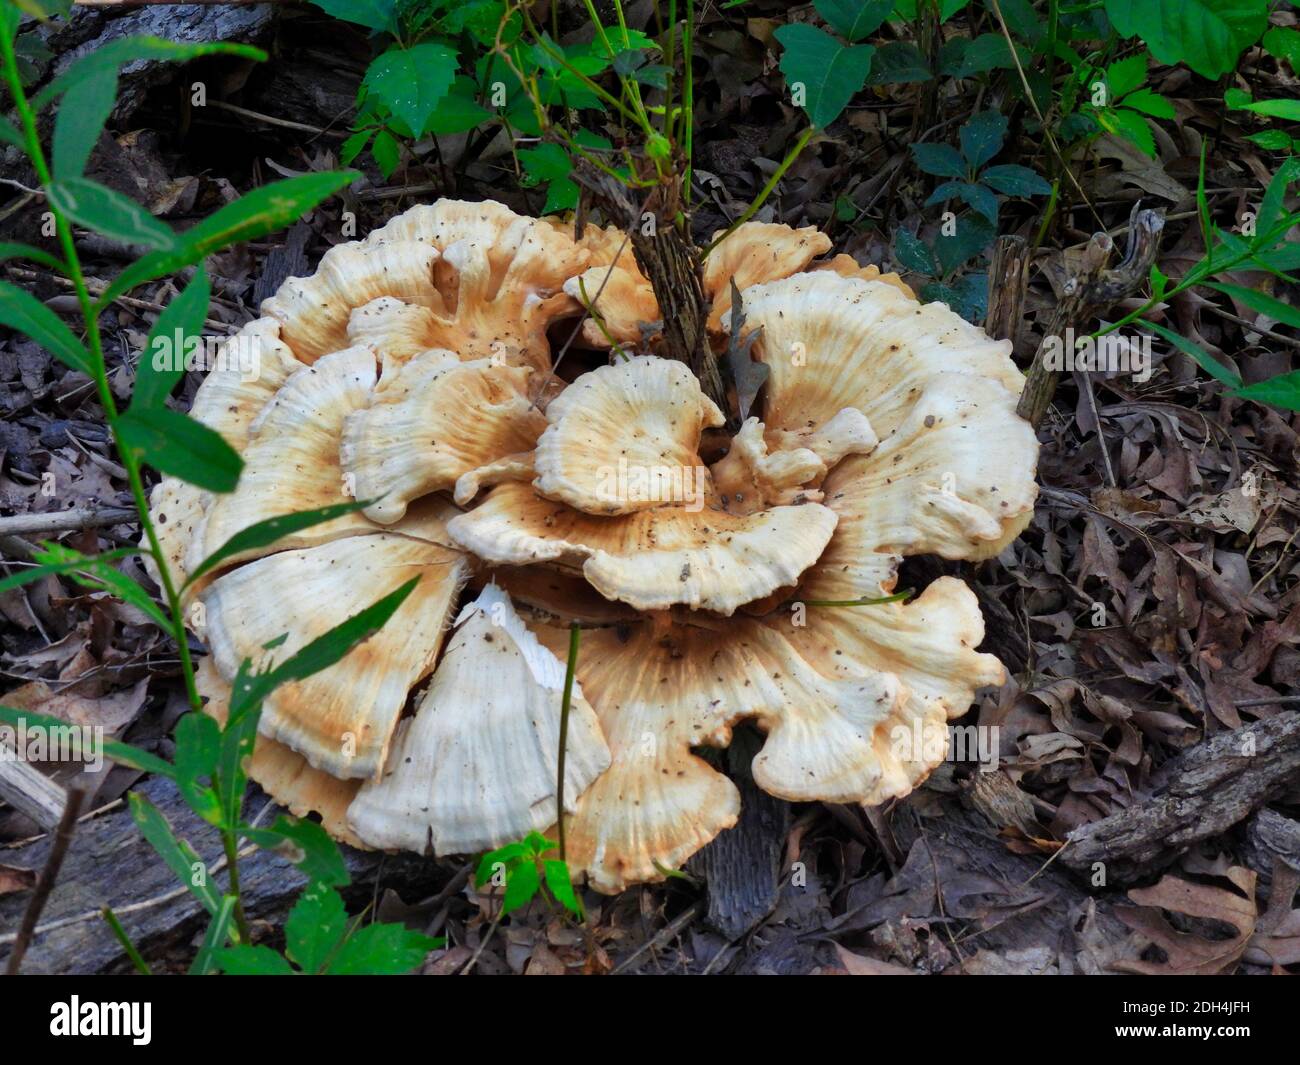 Closeup of Wild Mushroom Large Polypore Growing on the Ground on Wood Chipped Trail with Plant Growing Through the Center Micro of White and Brown Mus Stock Photo